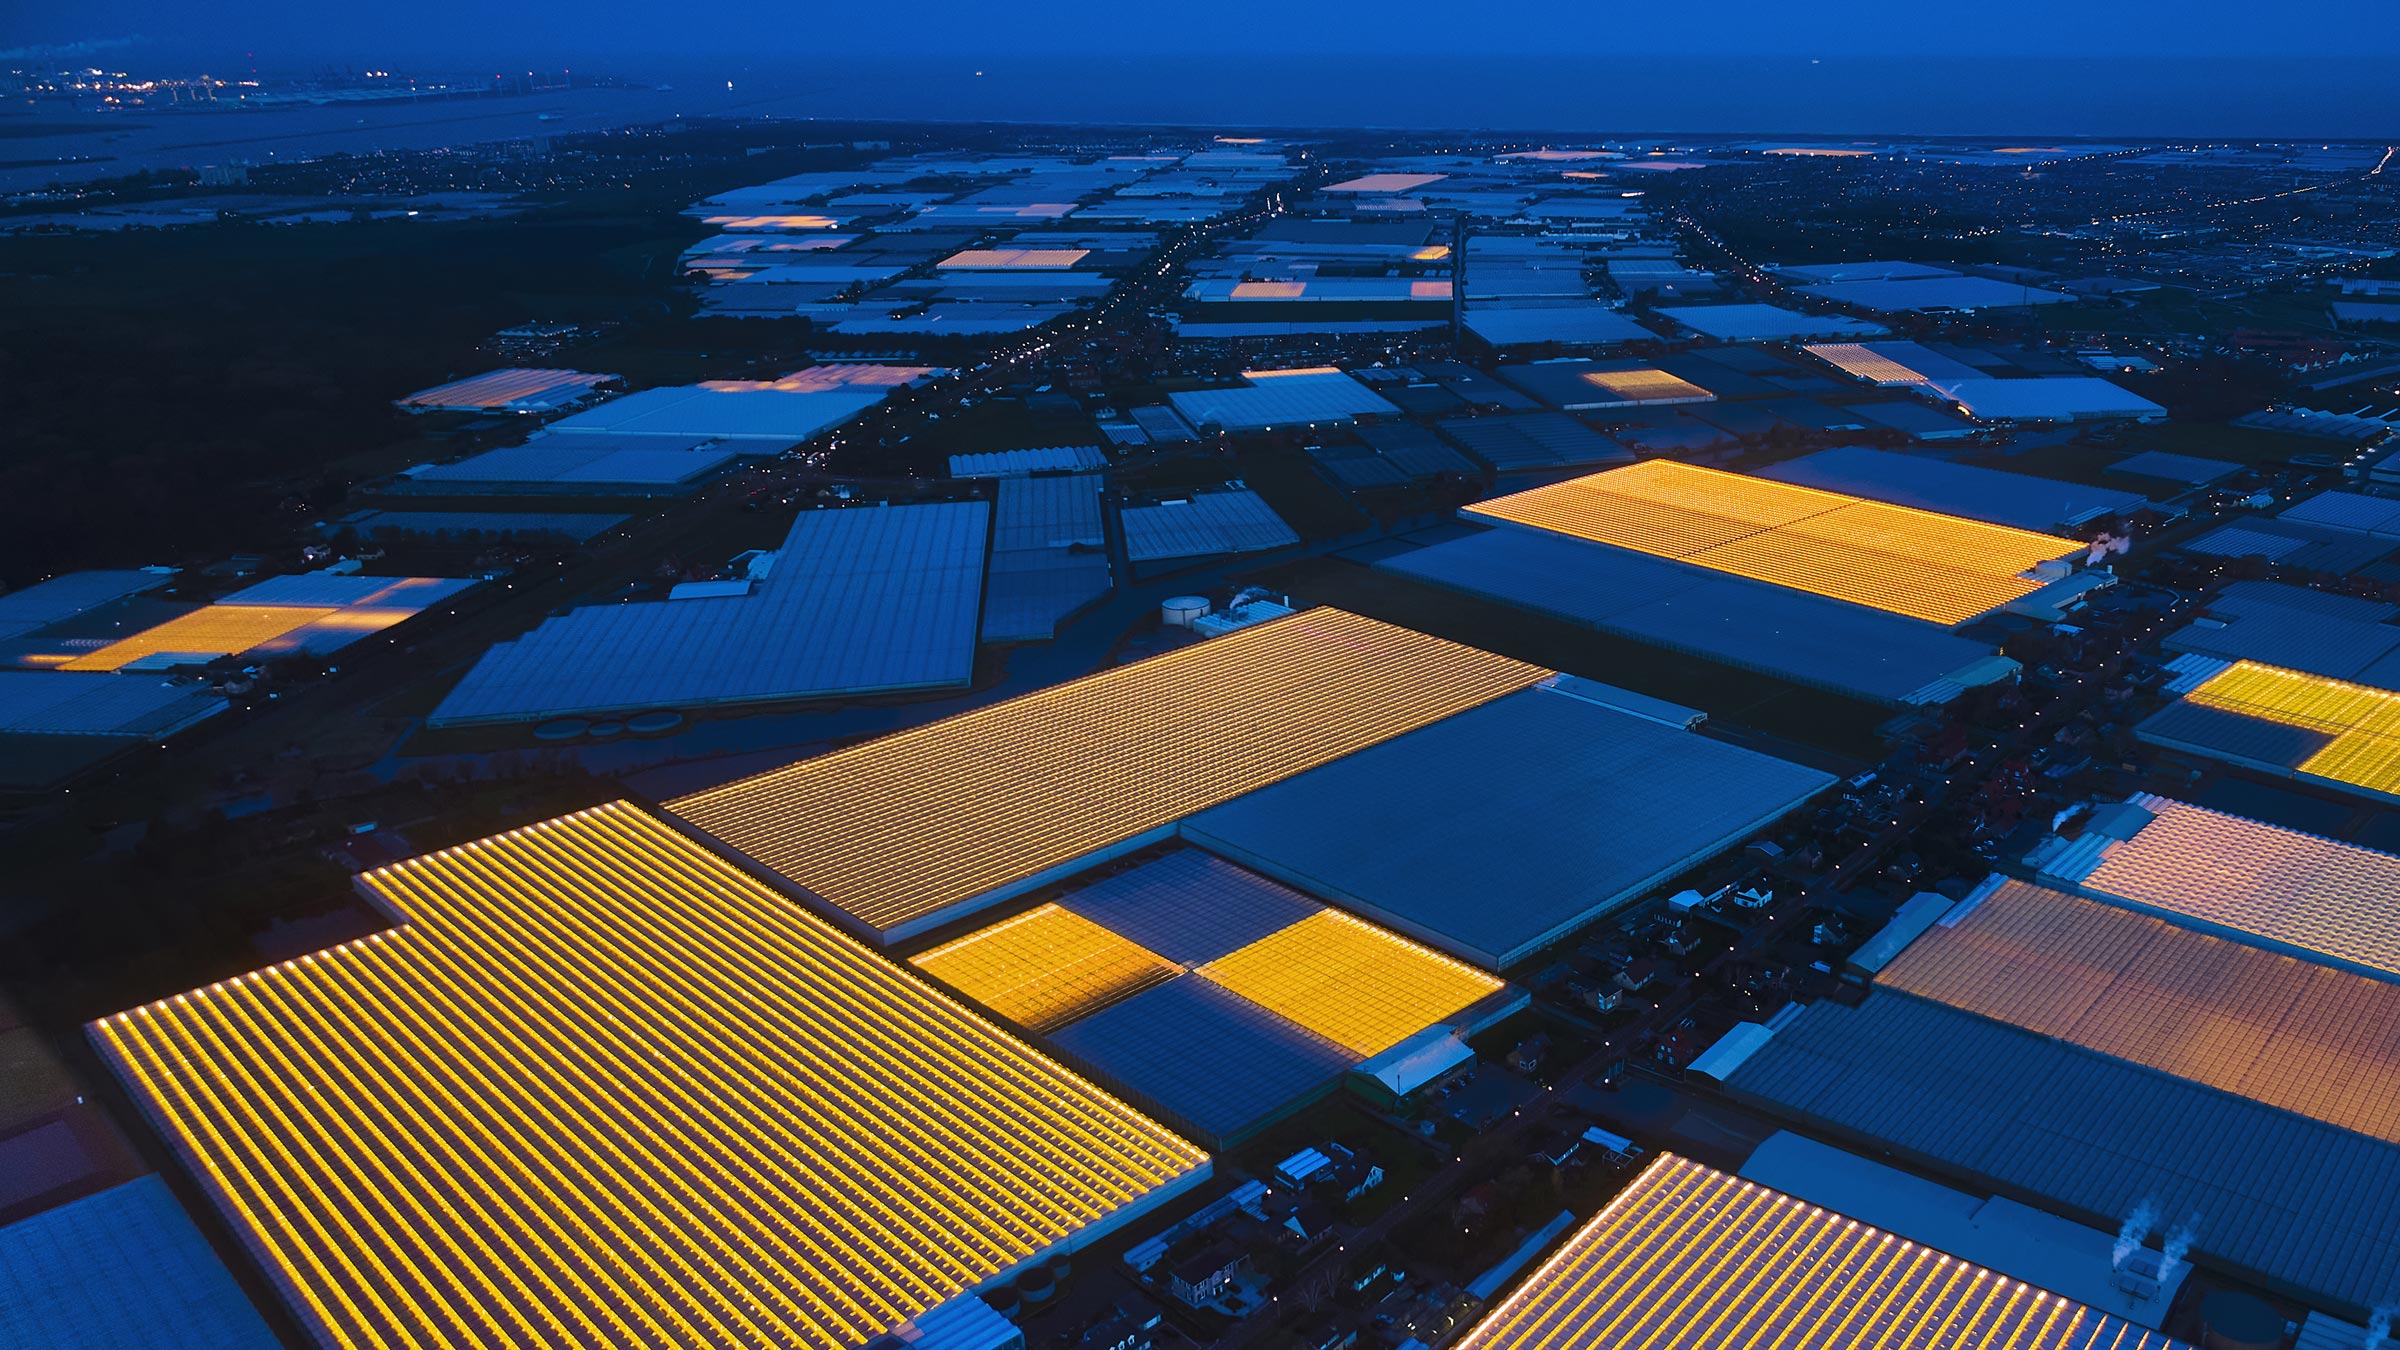 Luca Locatelli, Ultra Farming — Westland landscape blue light #1 The Netherlands, 2017.
Flying over the Westland in the Netherlands, the most advanced area in the world for agro farming technology. Furrows of artificial light lend an otherworldly aura to the greenhouse. Climate-controlled farms such as these grow crops around the clock and in every kind of weather.